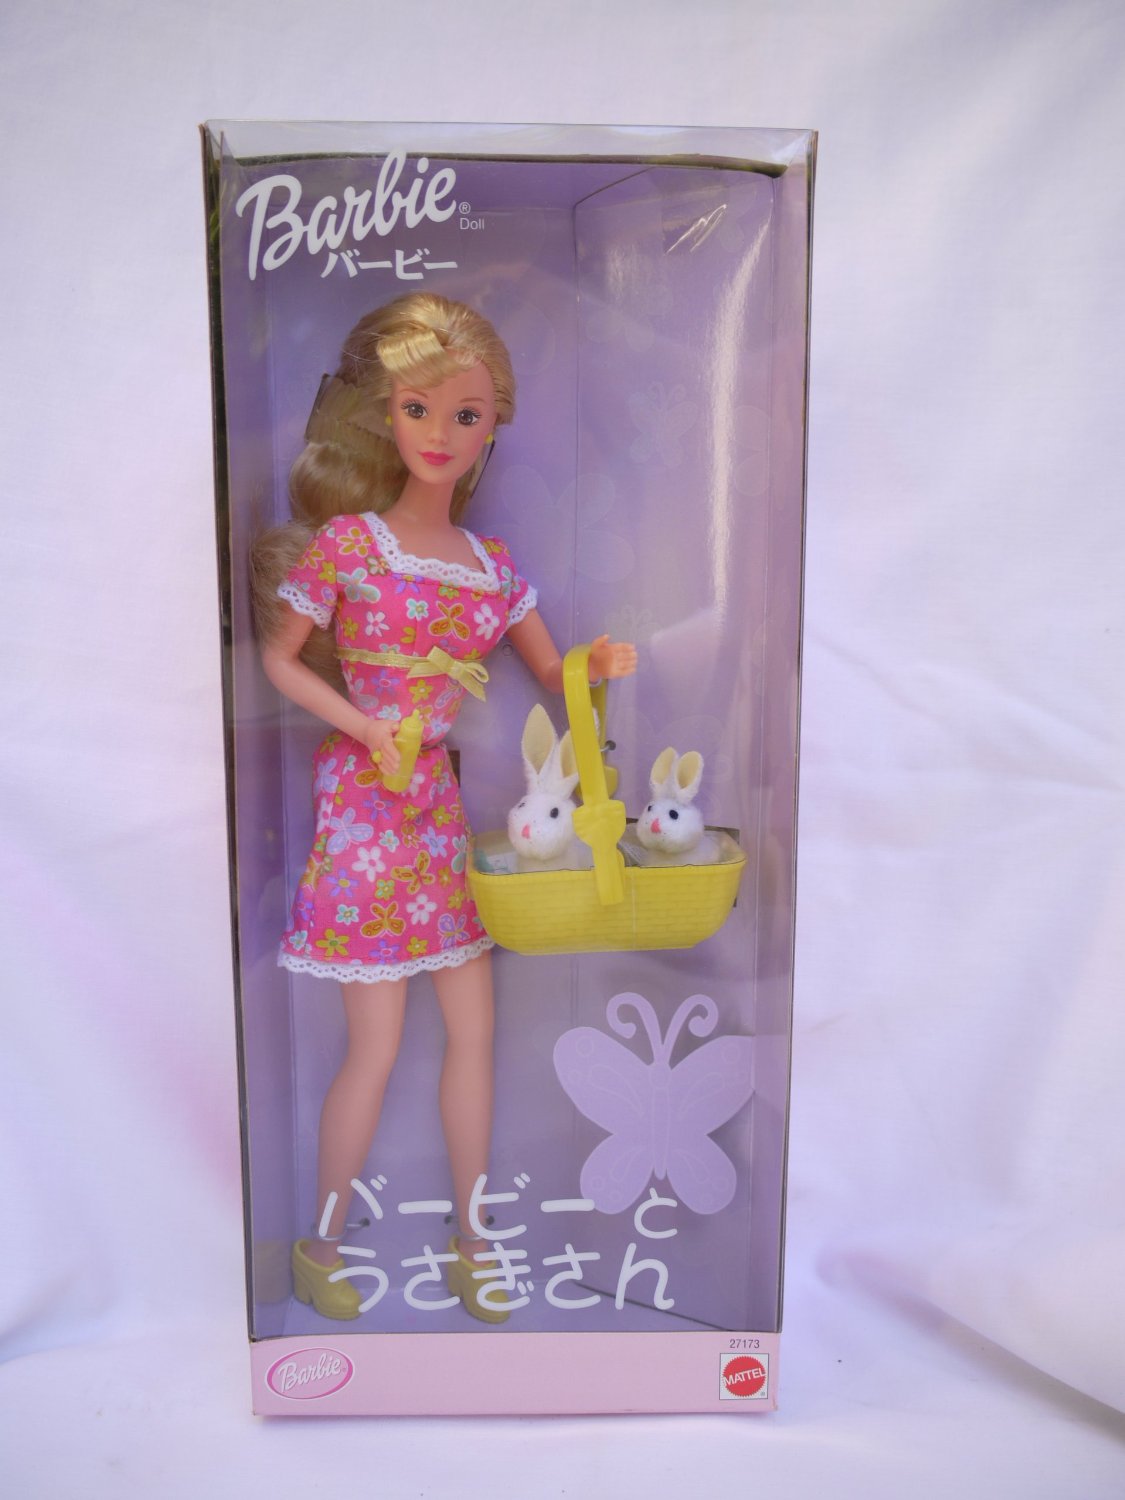 55 years of the barbie doll | Barbie Doll, friends and family